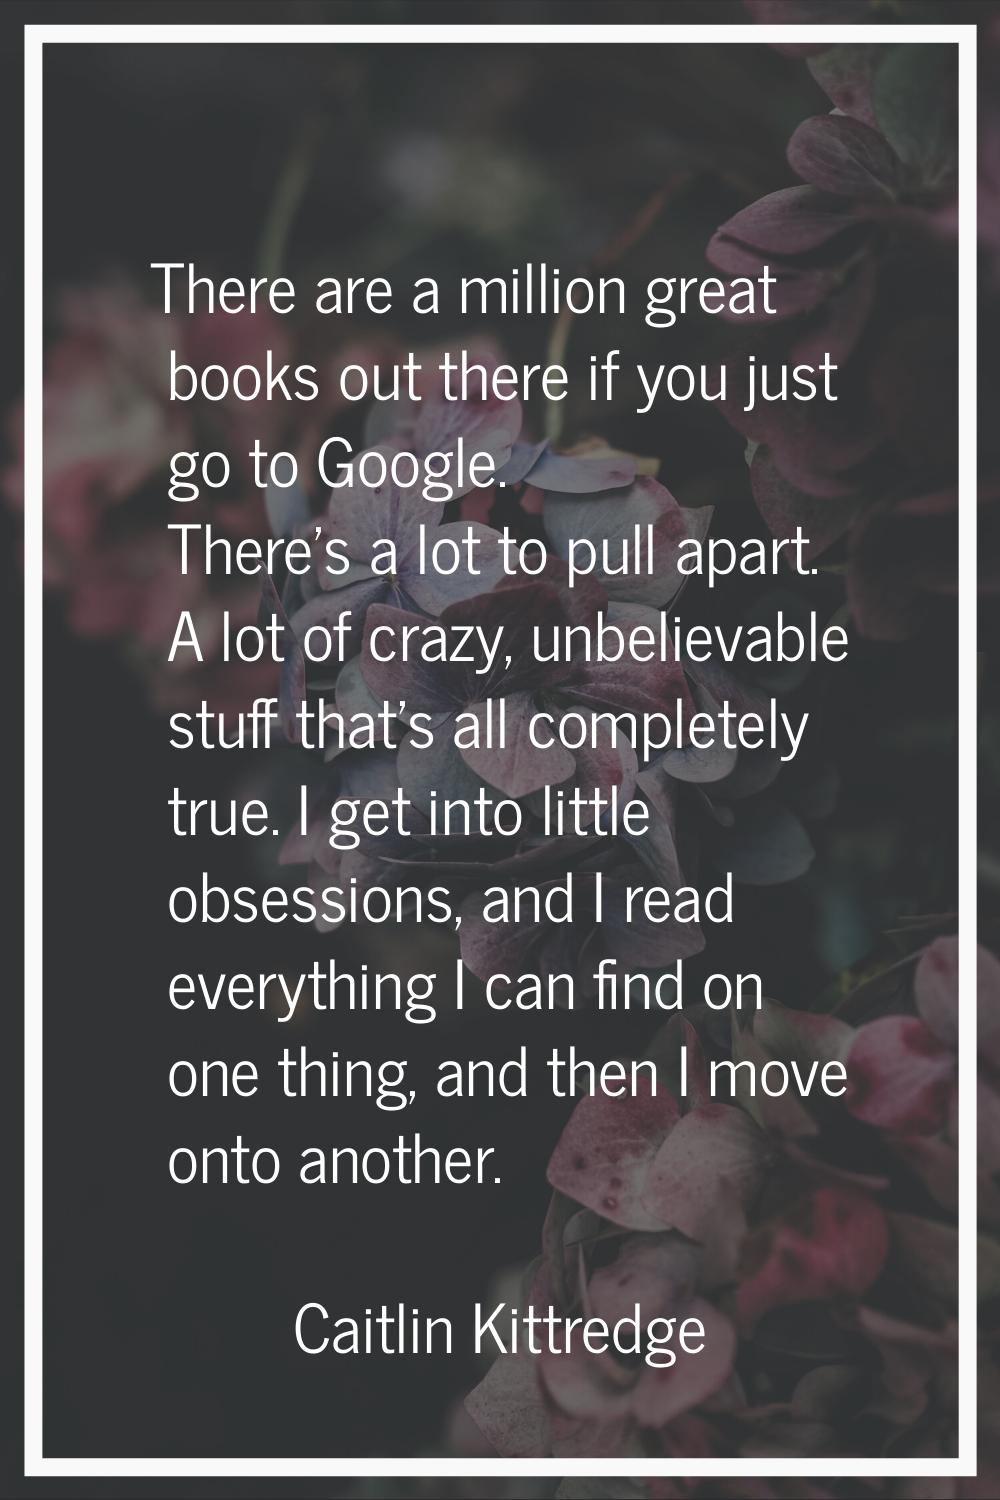 There are a million great books out there if you just go to Google. There's a lot to pull apart. A 